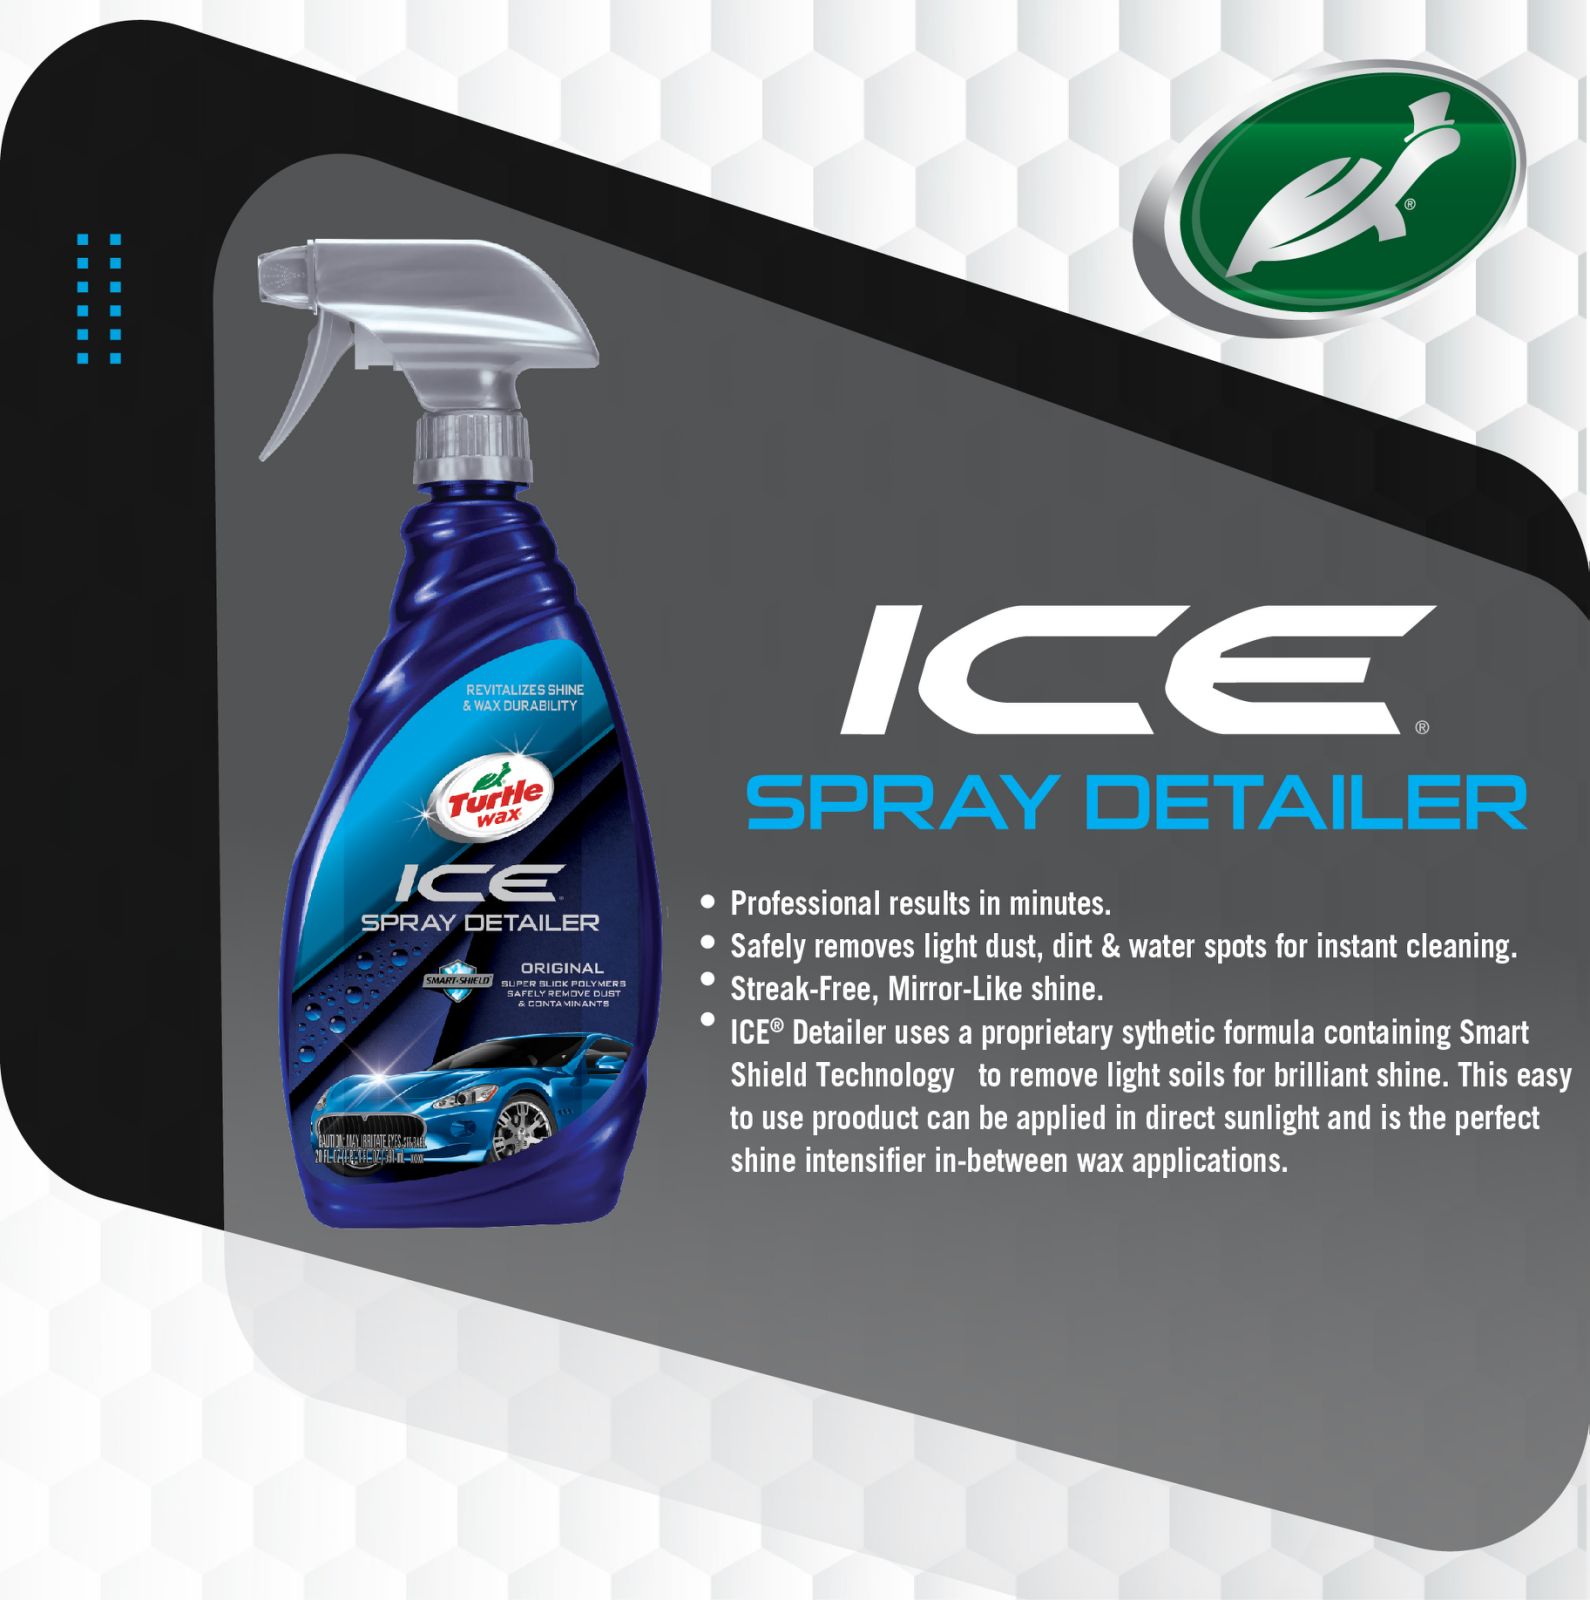 Turtle Wax ICE Synthetic Spray Wax (20 oz.) - Pack of 6